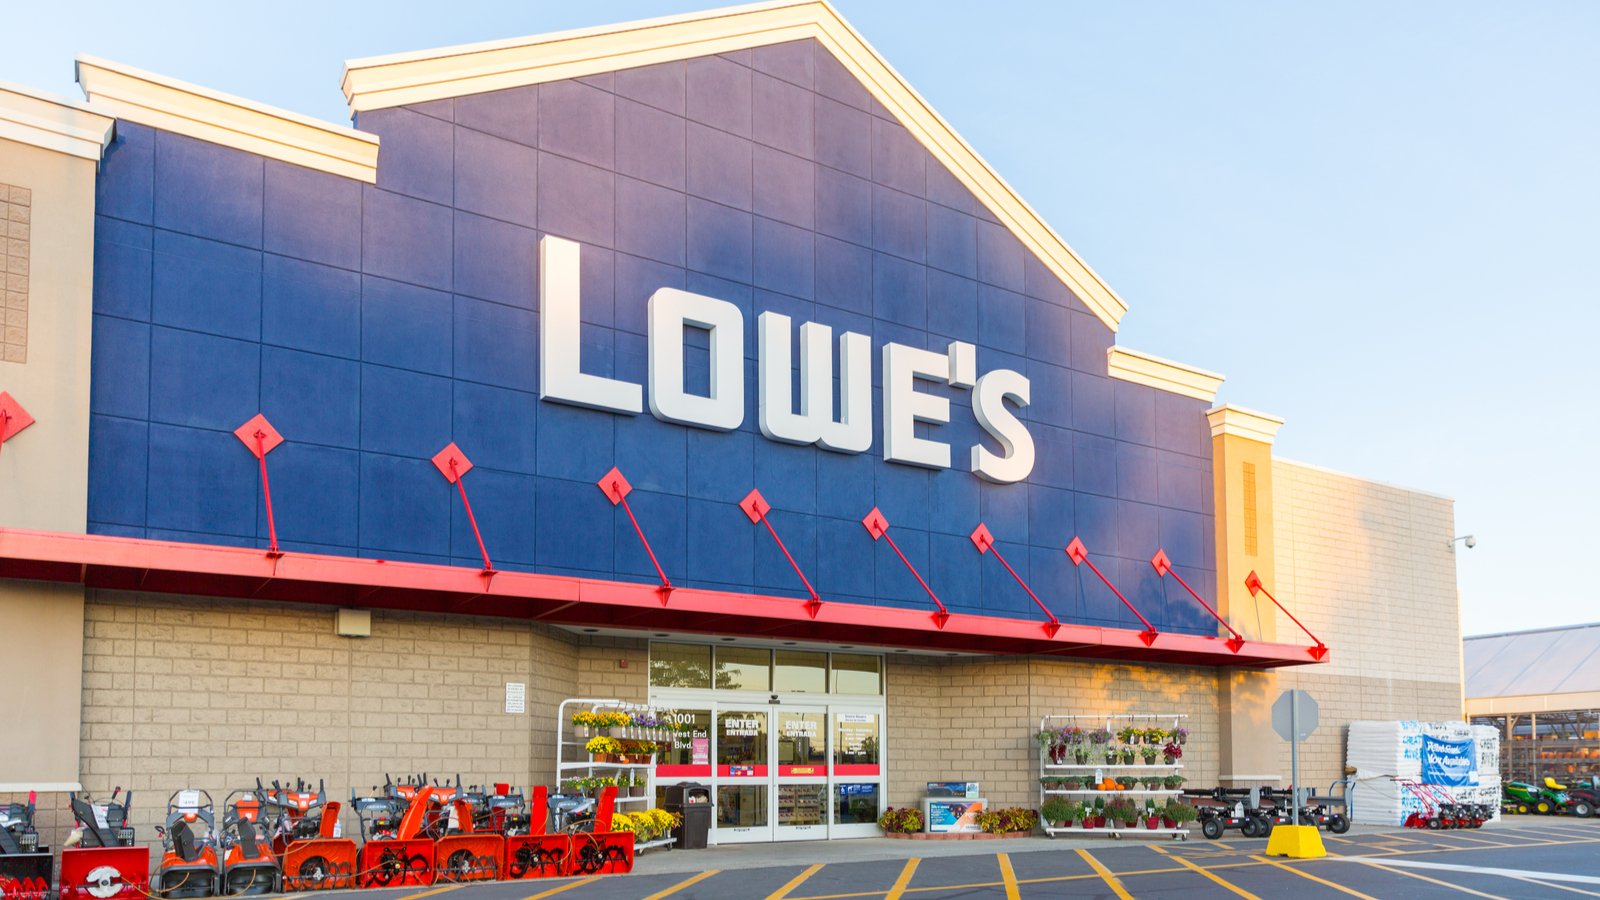 the layoff lowes